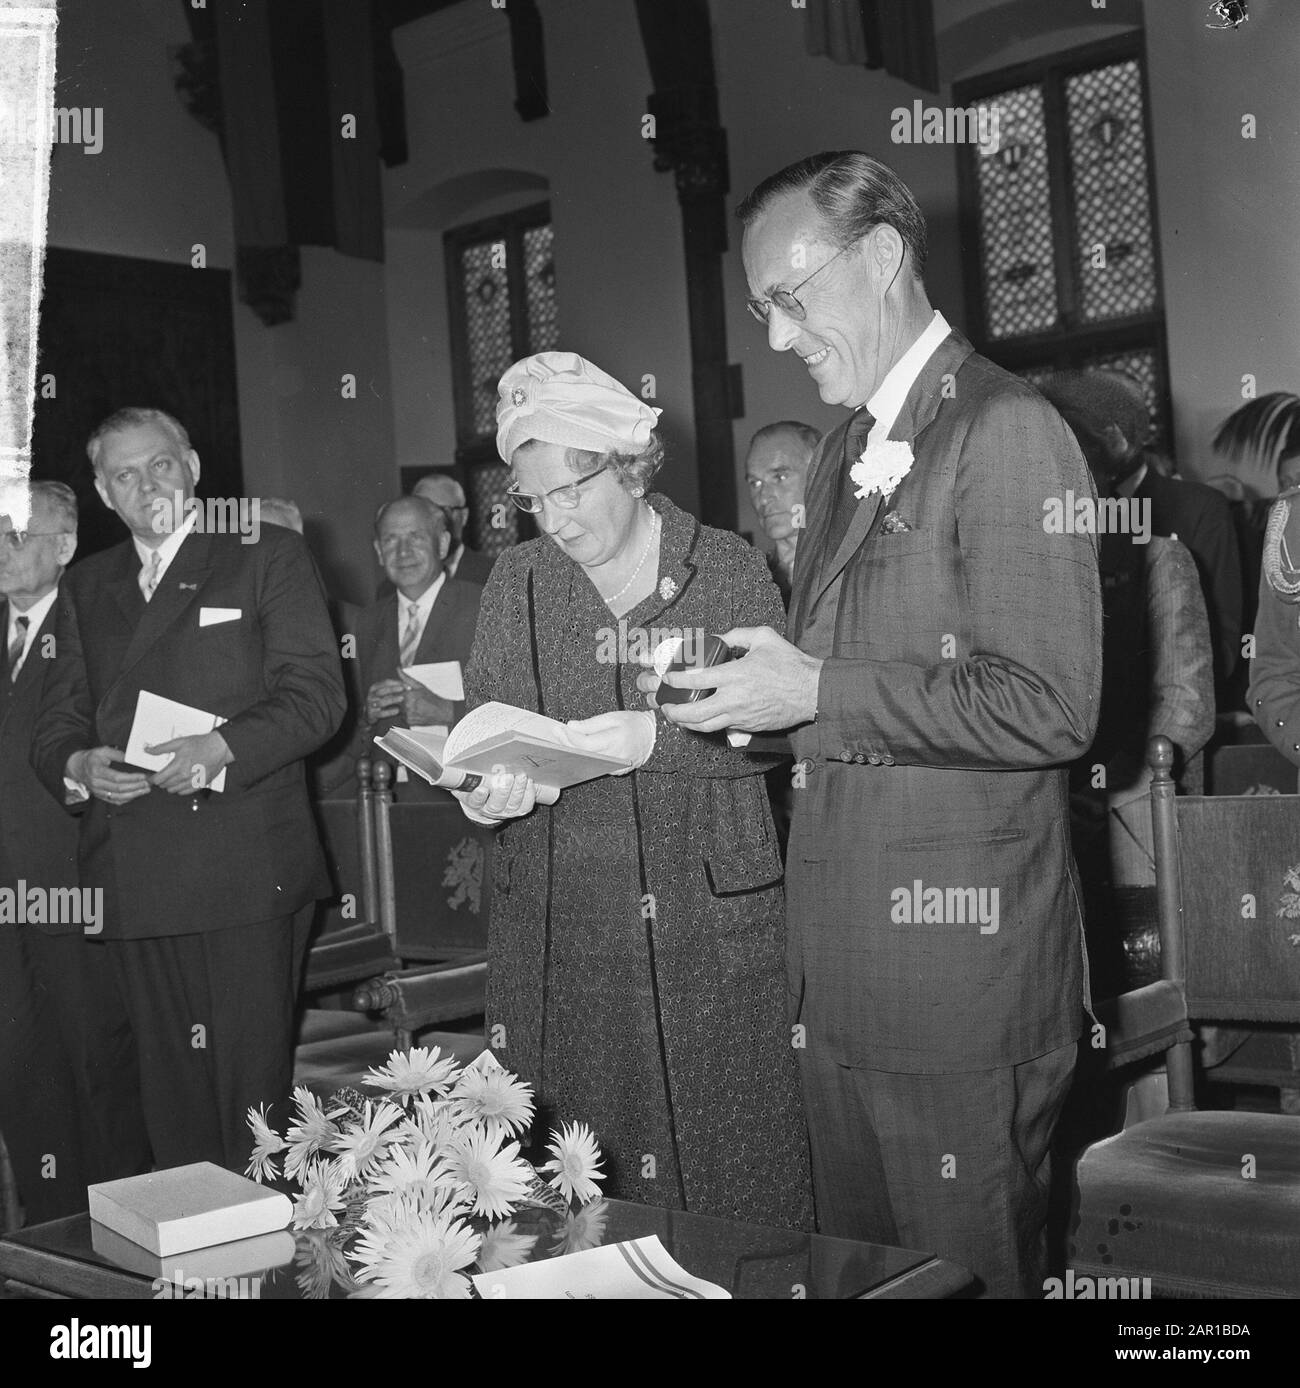 Freedom slustrum ex-political prisoners in The Hague  Queen Juliana receives a book and prince Bernhard a special badge Date: 23 June 1965 Location: The Hague, Zuid-Holland Keywords: books, queens, tokens, princes Personal name: Bernhard (prince Netherlands), Juliana (queen Netherlands) Stock Photo